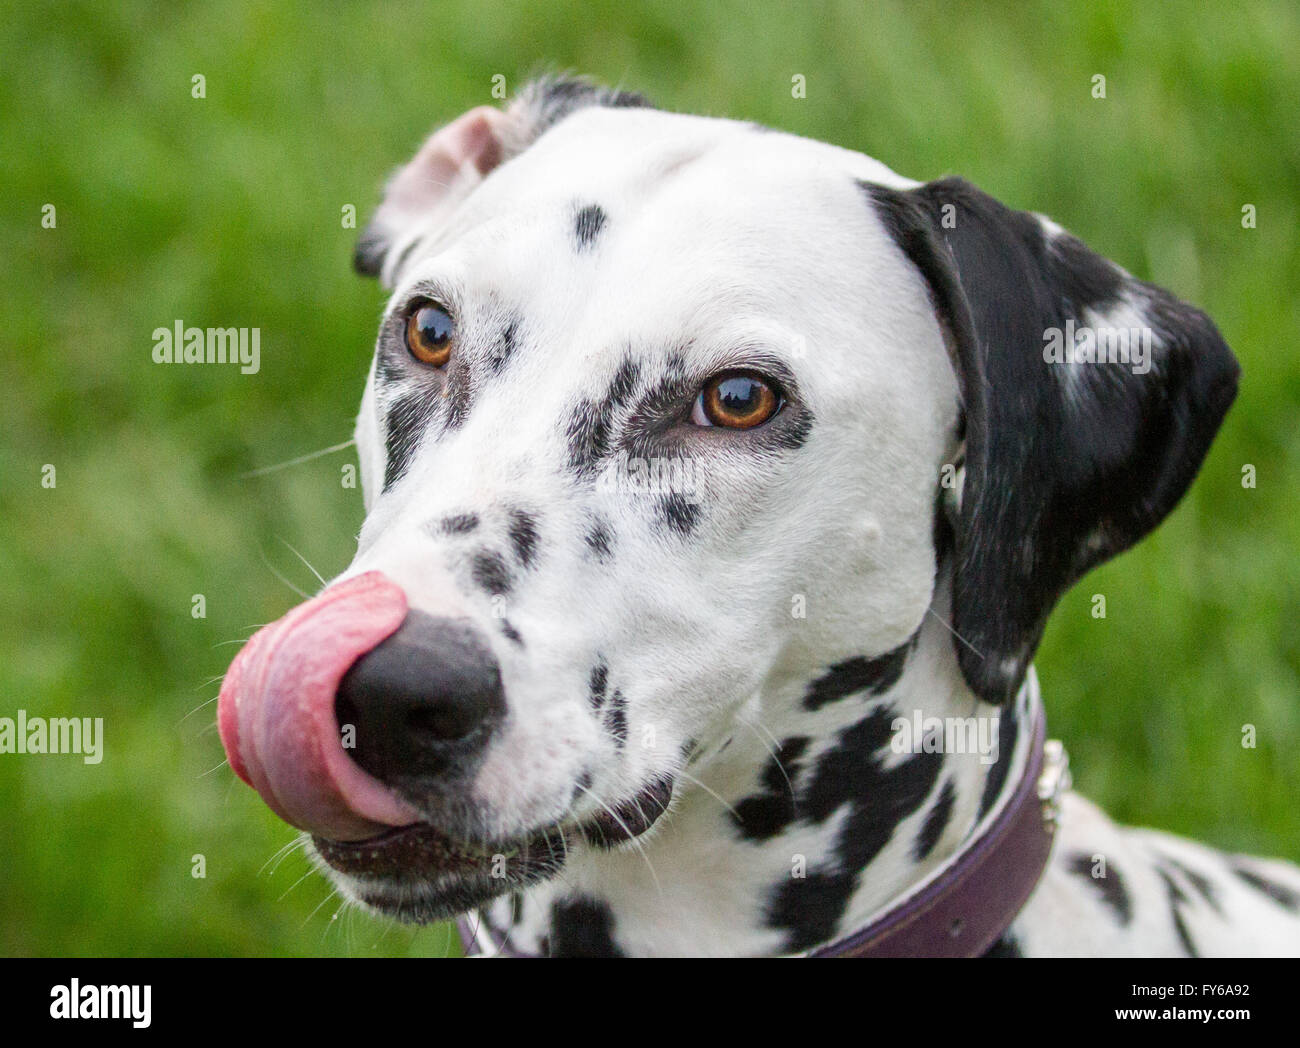 Head shot of a dalmatian licking her nose.  She is wearing a collar. The background is green and out of focus. Stock Photo